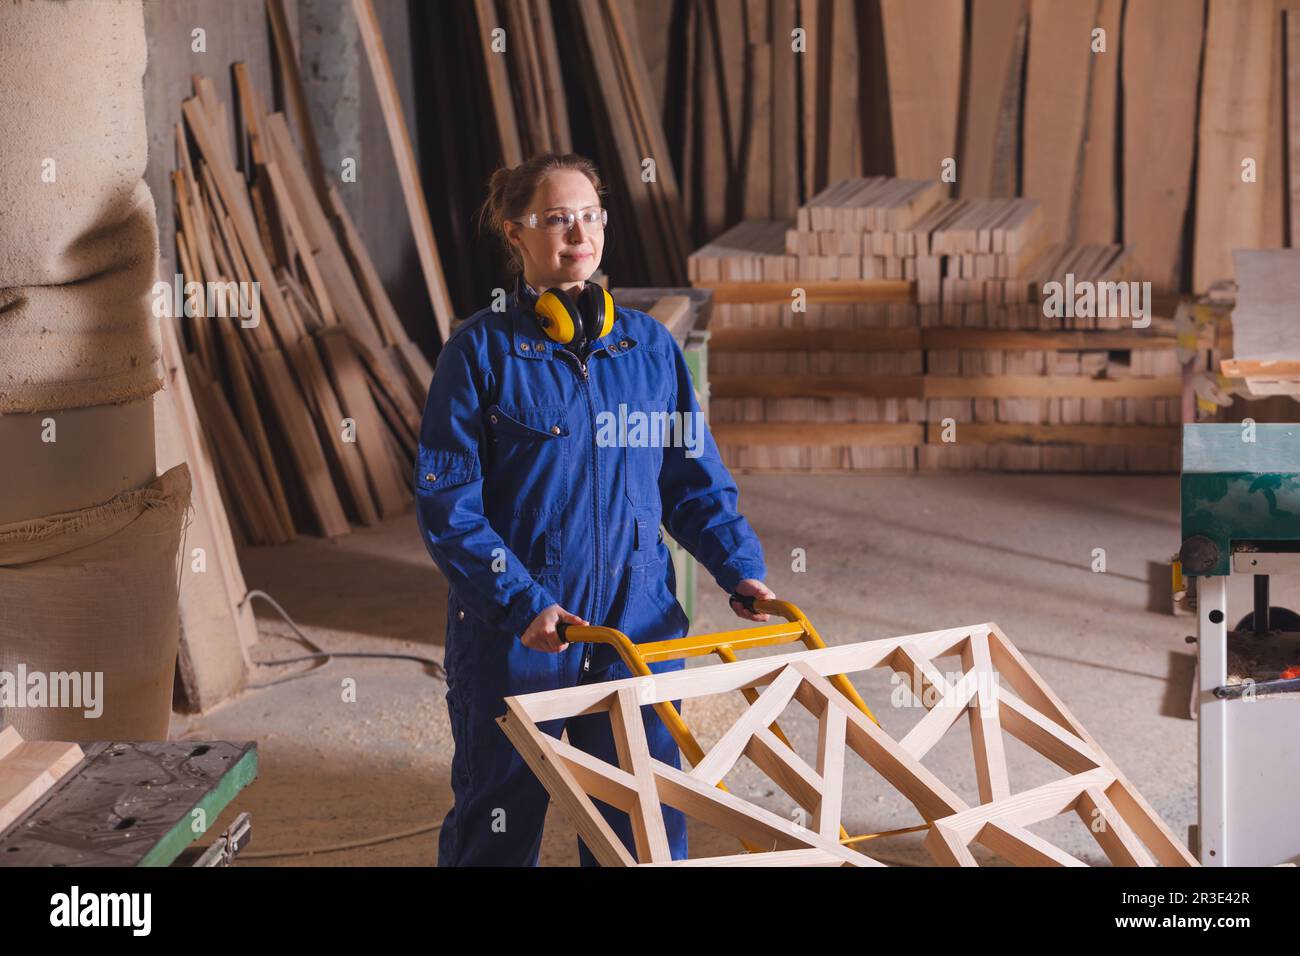 Piece of carved wood on hand truck Stock Photo